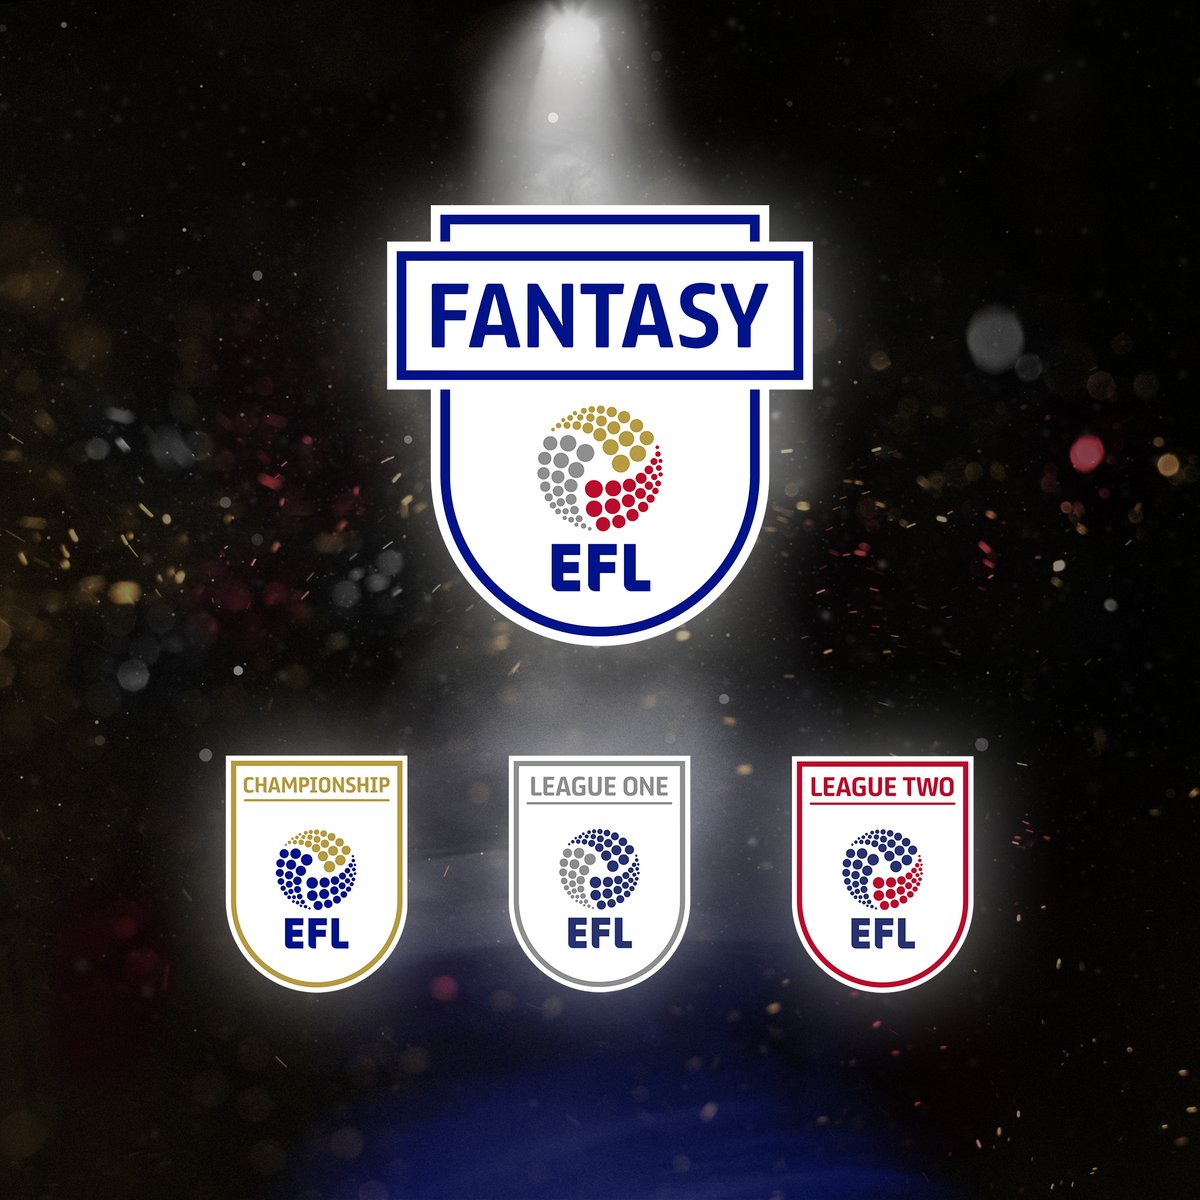 Three divisions, one #FantasyEFL! Be the first to hear more - visit fantasy.efl.com now. #EFL | @FEFLOfficial